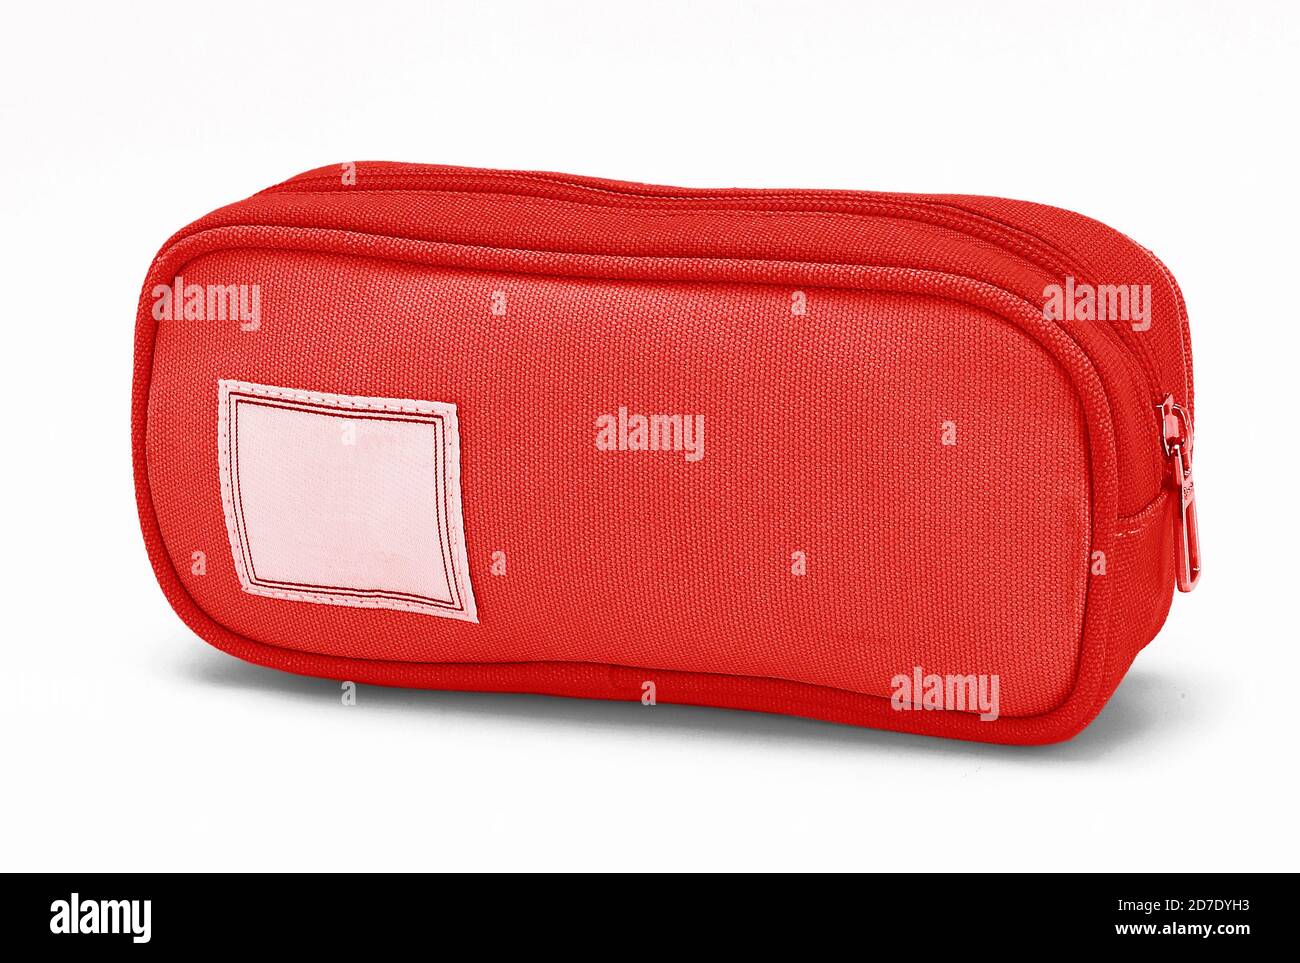 https://c8.alamy.com/comp/2D7DYH3/a-pencil-case-can-also-contain-a-variety-of-other-stationery-such-as-sharpeners-pens-glue-sticks-erasers-scissors-rulers-2D7DYH3.jpg